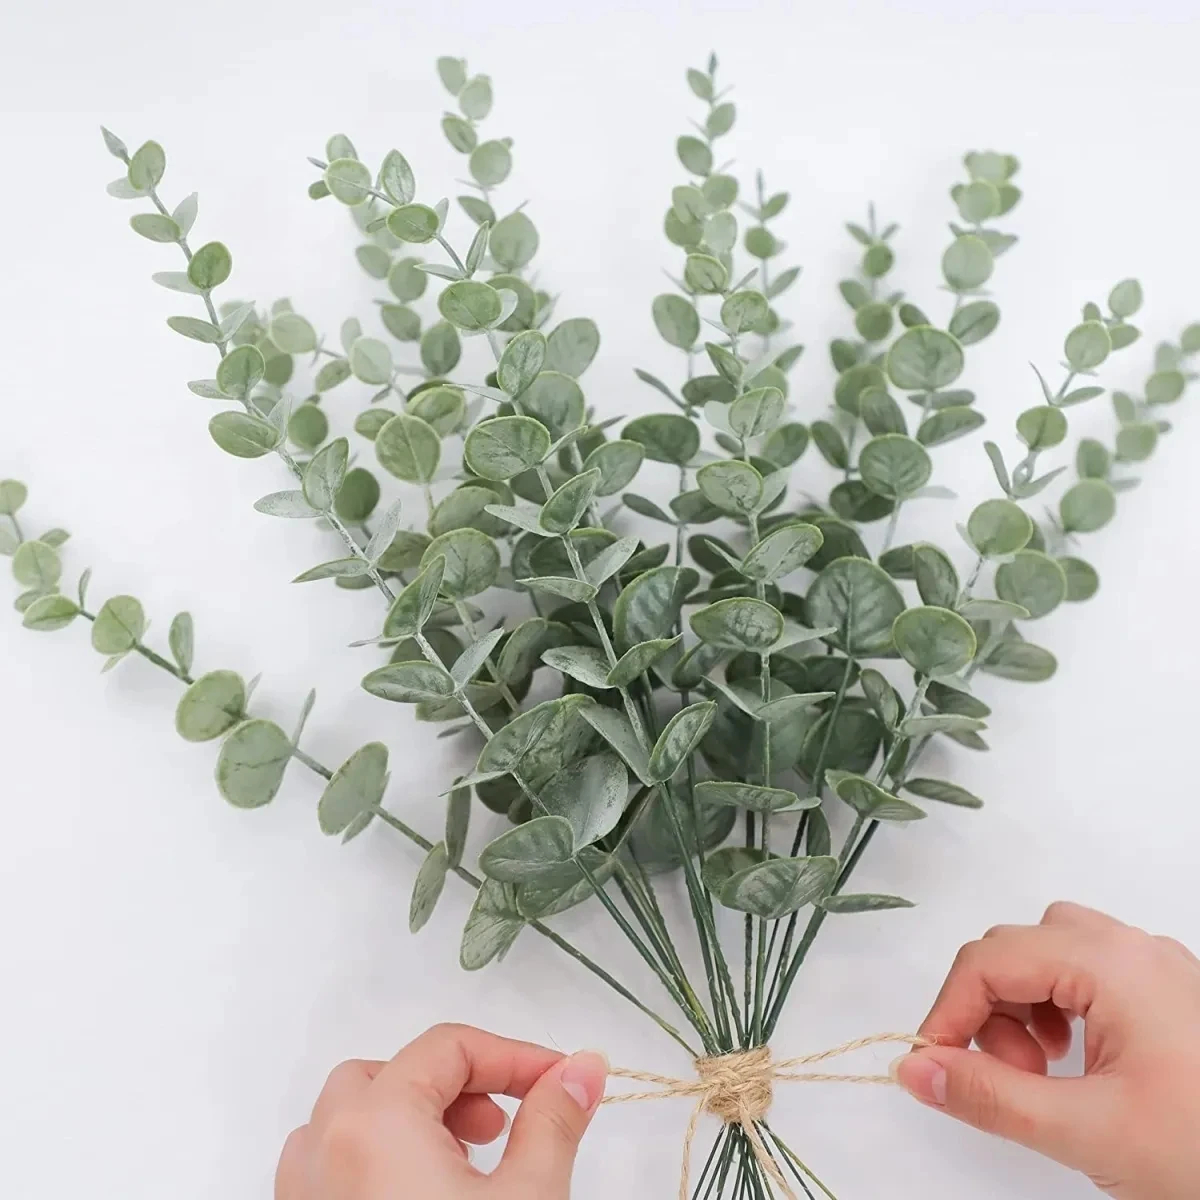 

12/10PCS Eucalyptus Stems Artificial Leaves Fake Plants Green Leaf Branches Home Wedding Party Table Decorations Garden Wreaths